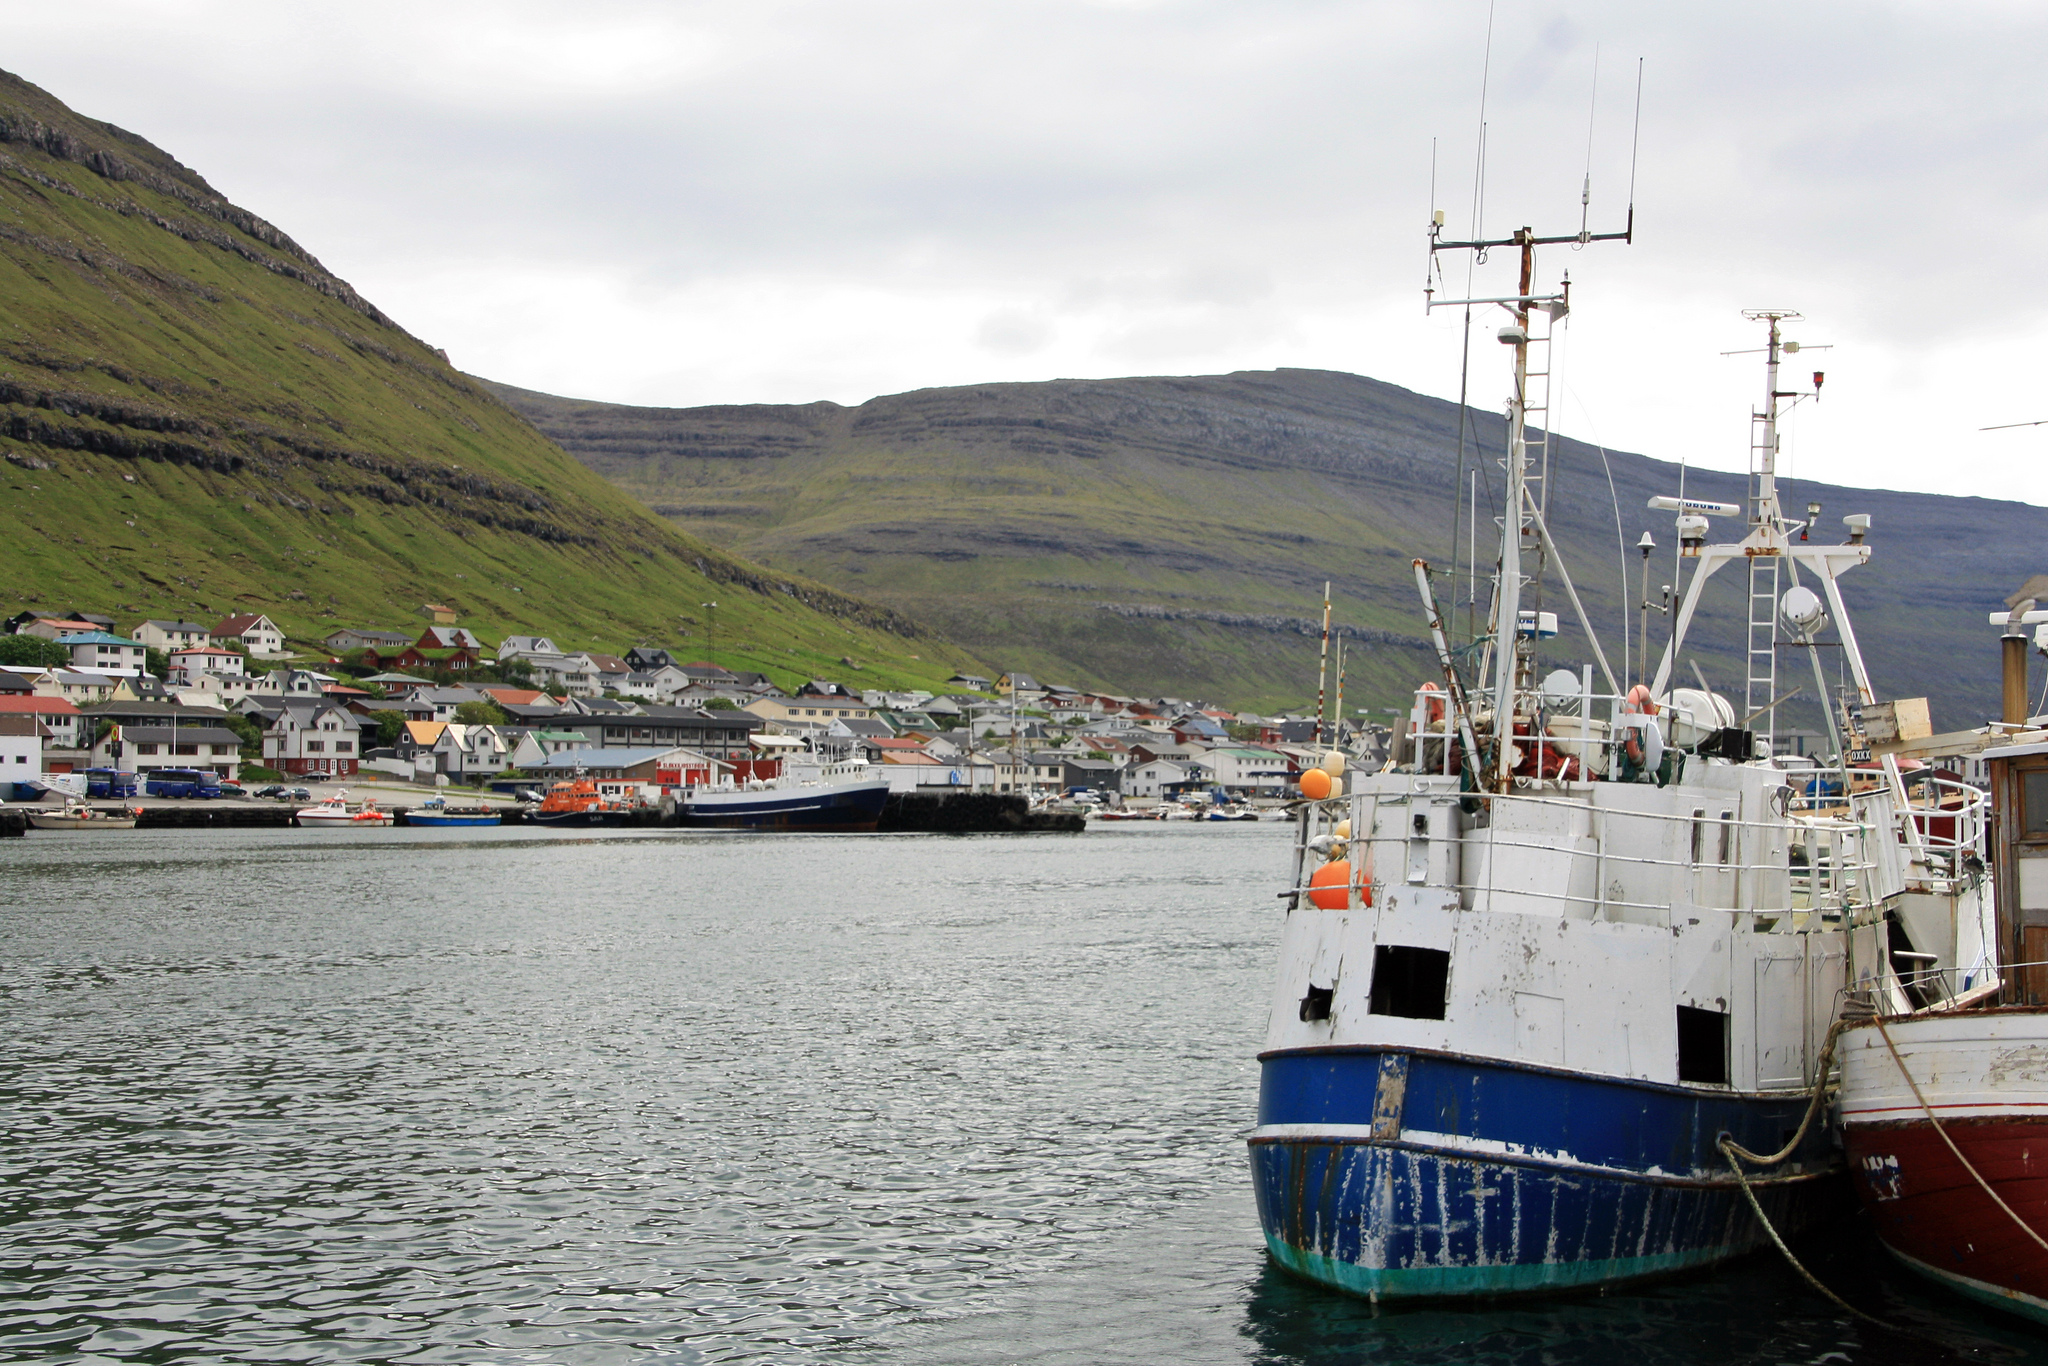 Redistributing resource rights in a resource-dependent economy: The case of the Faroese fisheries reform